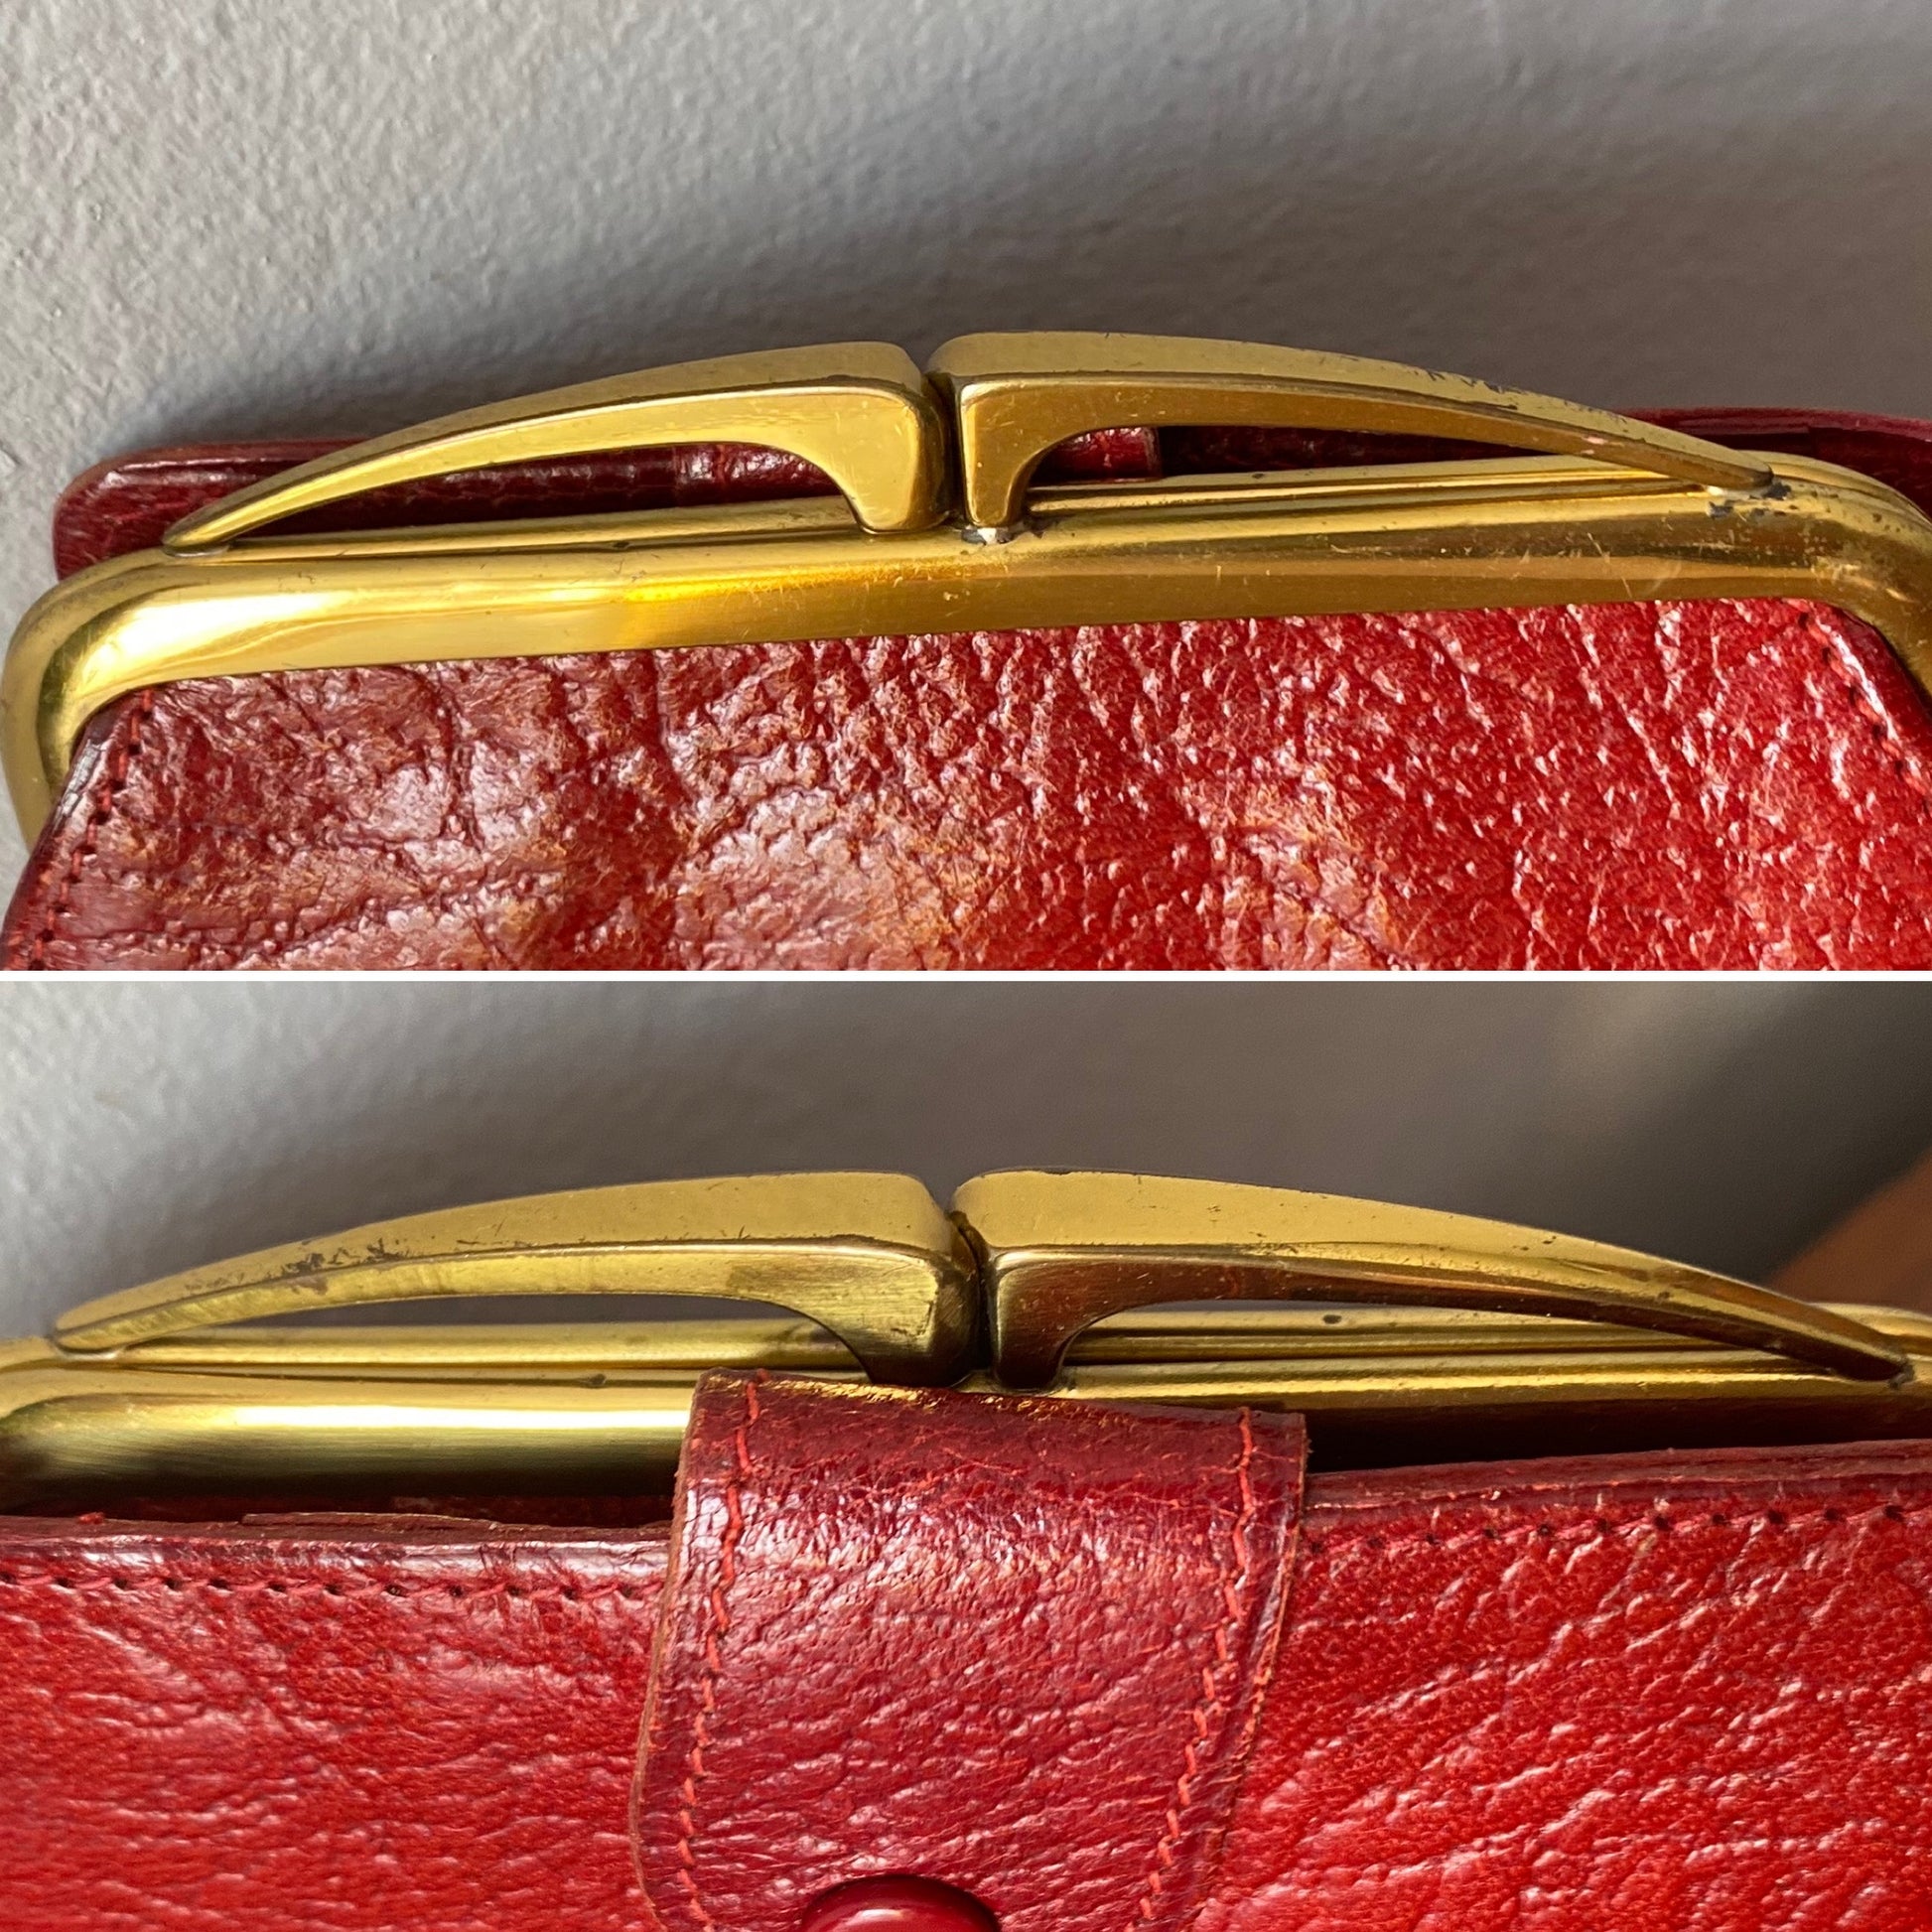 Vintage red leather purse with a kiss lock closure